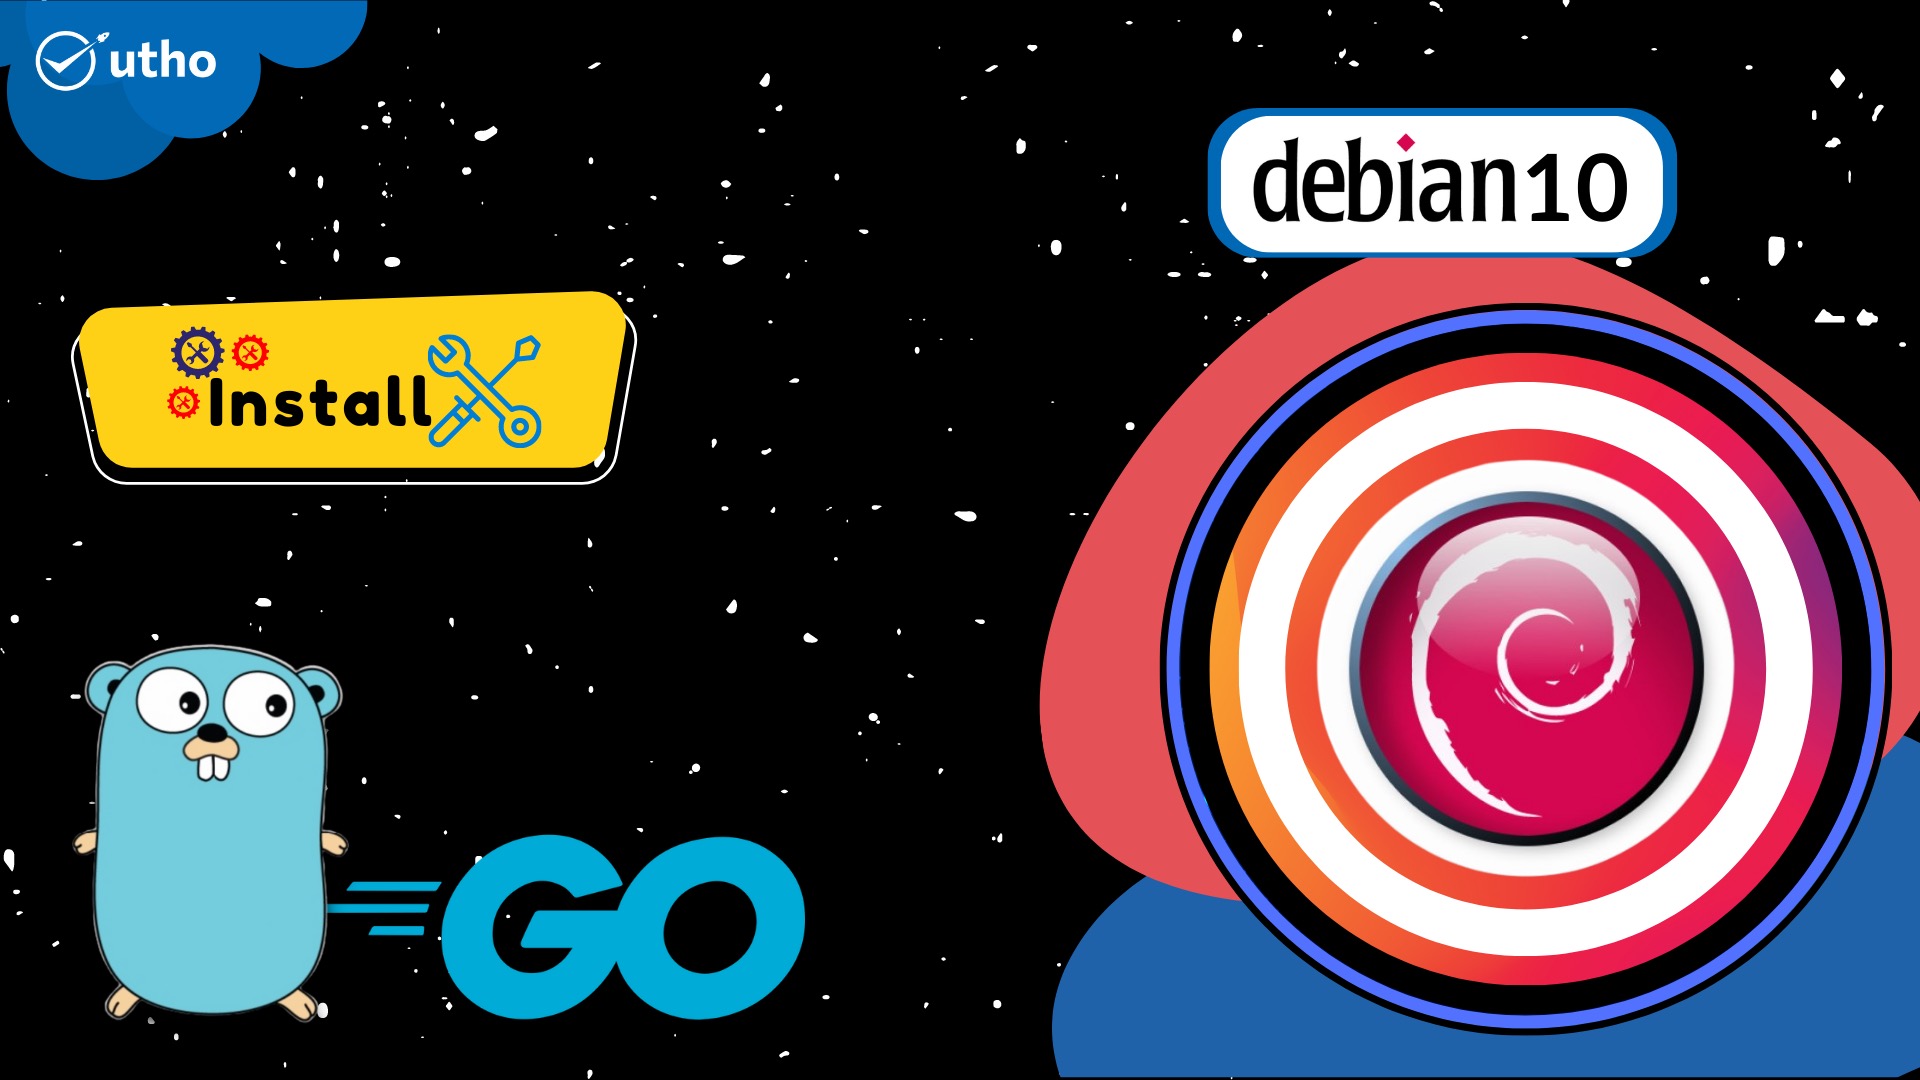 How to install Go on Debian 10